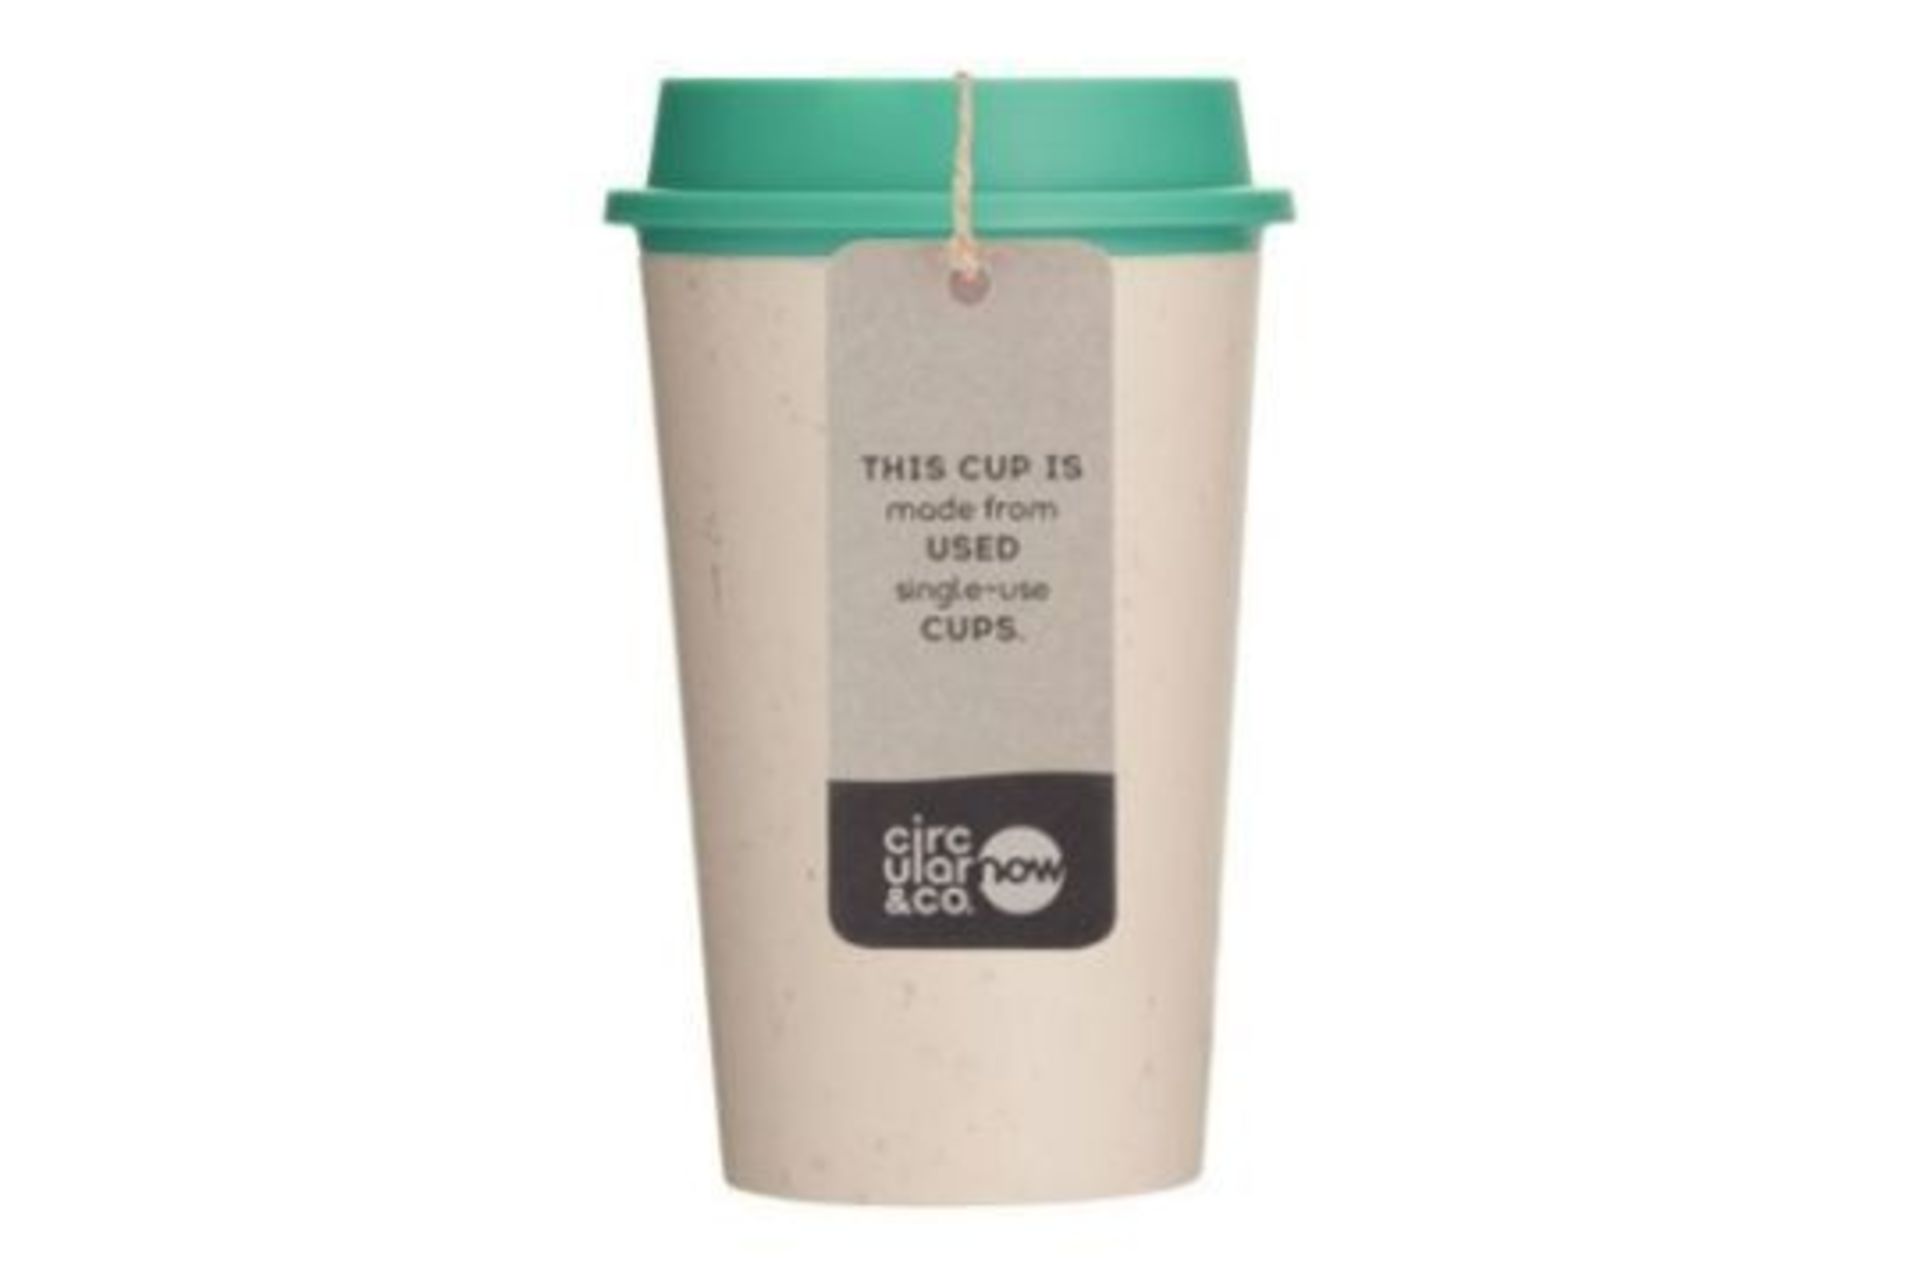 PALLET TO CONTAIN 240 X NEW PACKAGED Circular NOW Cup 12oz Circular NOW Cup 12oz Cream & Happy Mint.